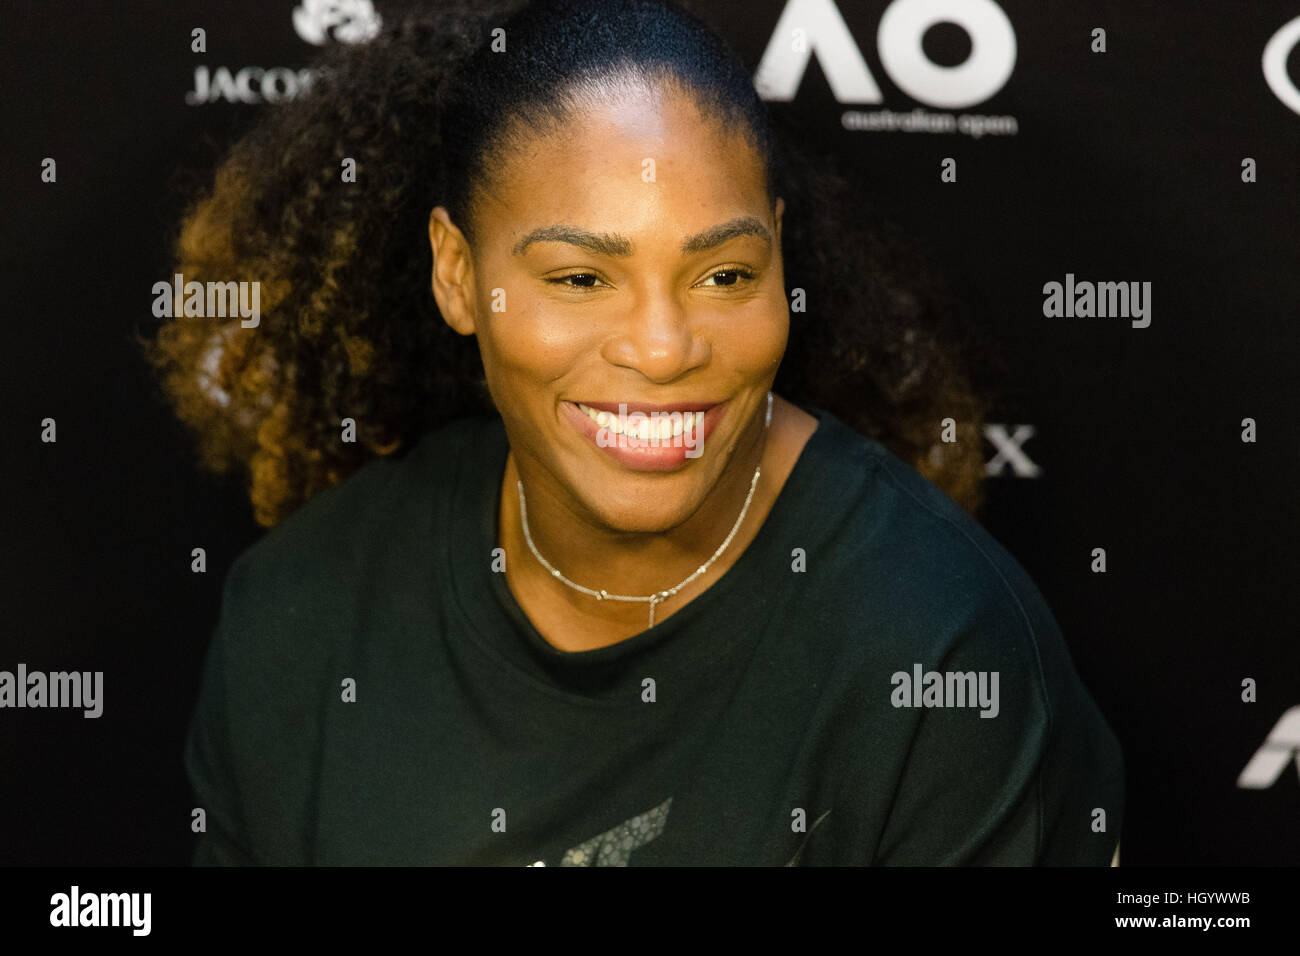 MELBOURNE, AUSTRALIA - 14th  JANUARY 2017: Serena Williams of the USA speaks during a press conference before the start of the 2017 Australian Open at Melbourne Park in Melbourne, Australia. Credit: Frank Molter/Alamy Live News Stock Photo